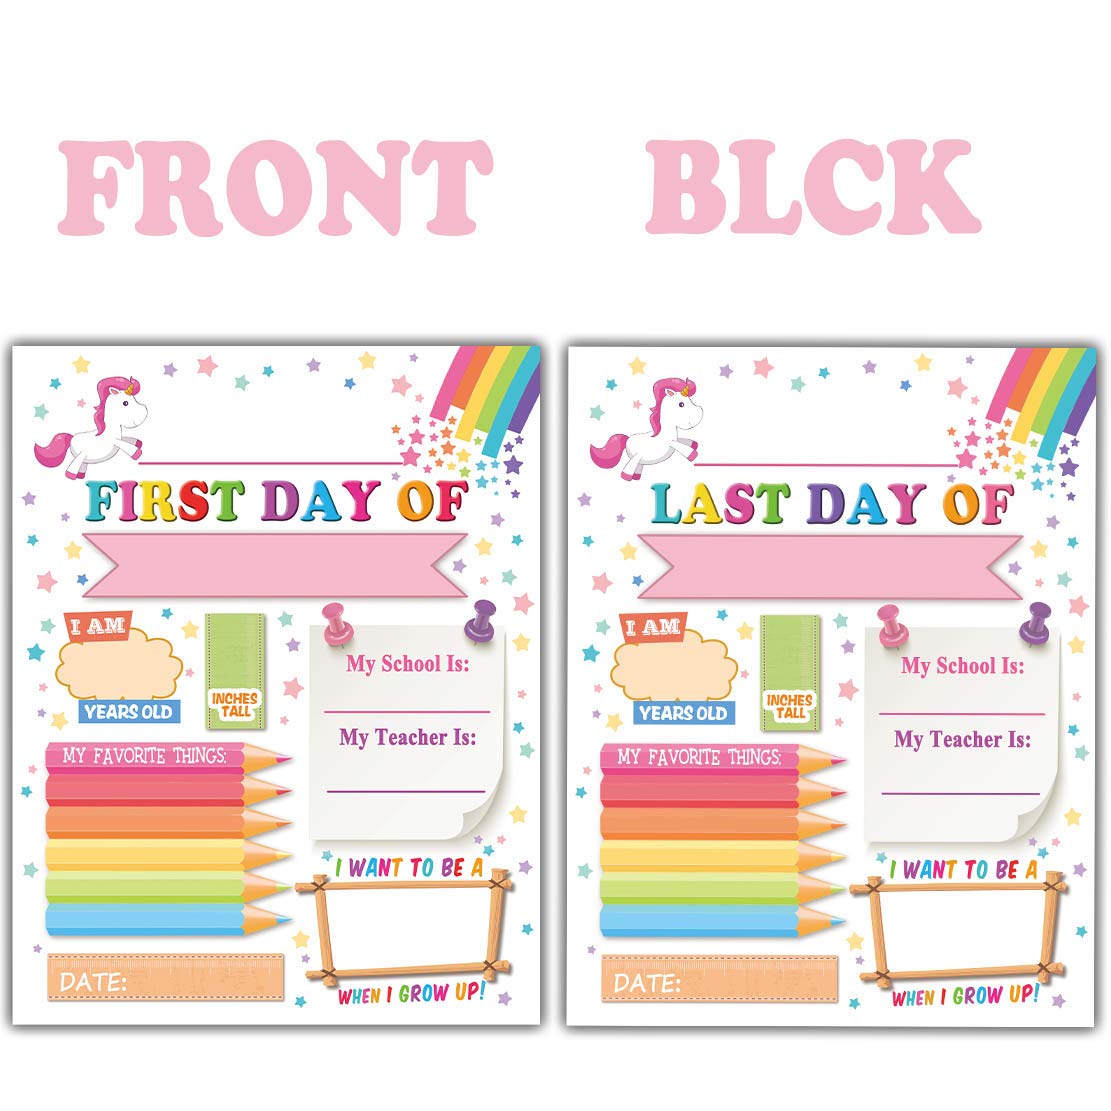 Unicorn First Day of School Sign and Last Day of School Sign -Preschool,Back to School,Elementary School Photo Booth Prop - 10 Sets